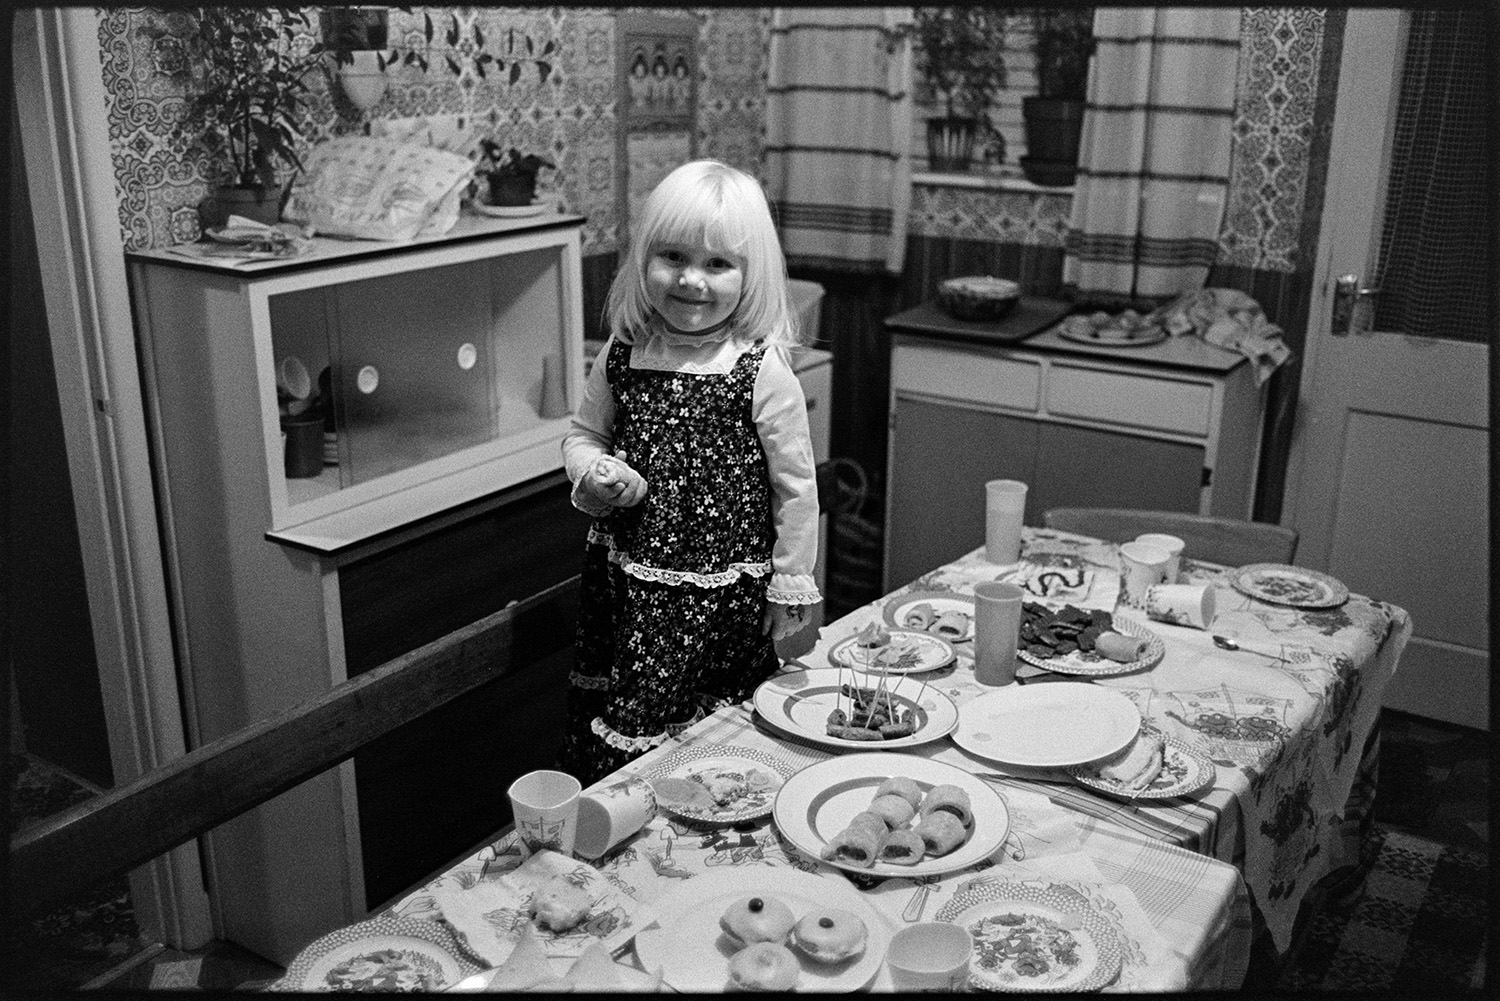 Children's party food on table. Birthday Party. 
[Rachel Davey at a children's birthday party in a house at Rectory Road, Dolton. She is stood on a bench by a table laid with party food.]